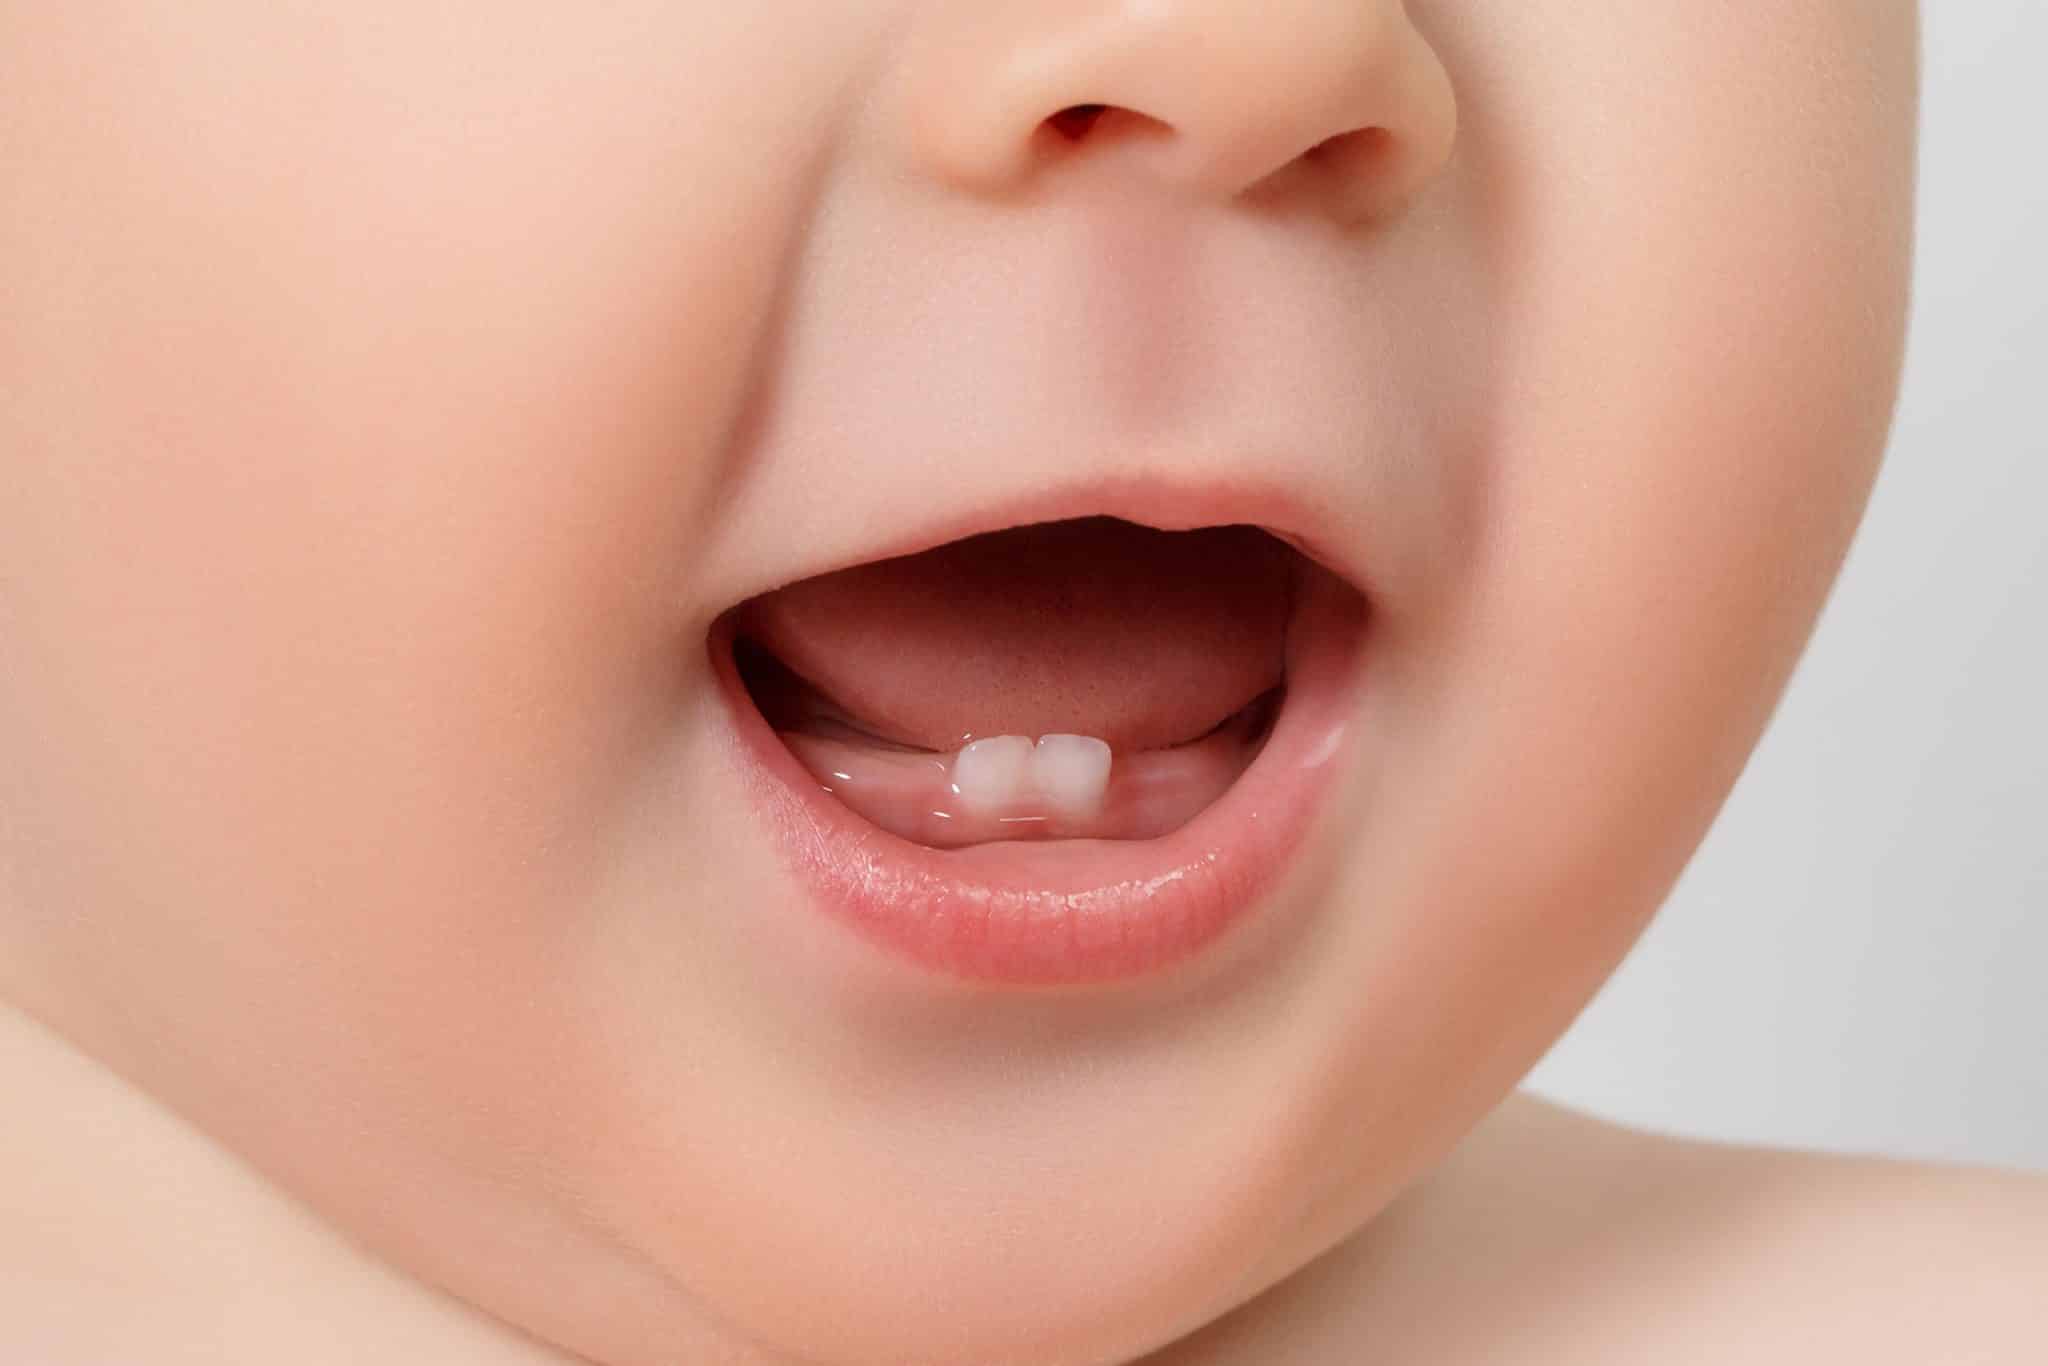 Picture of a baby with two front teeth.